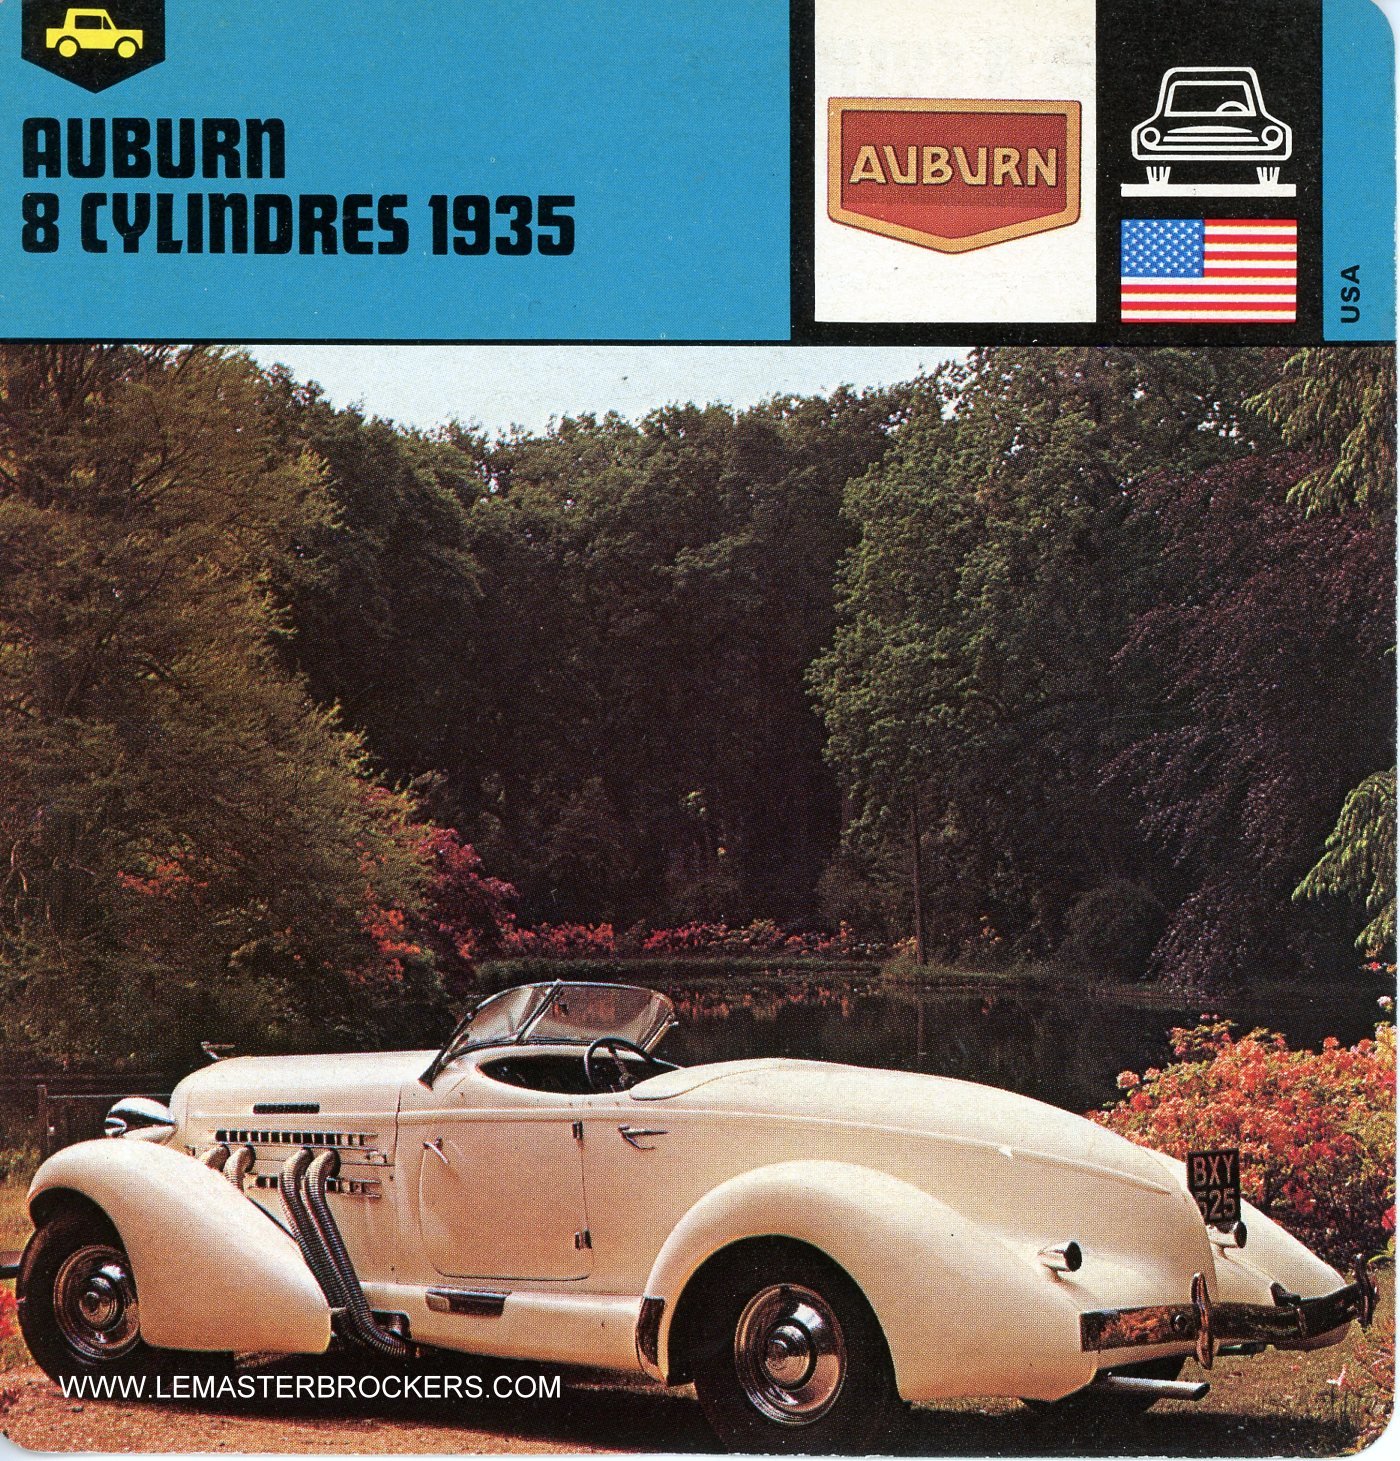 FICHE AUTO AUBURN 8 CYLINDRES 1935 CARS-CARD LEMASTERBROCKERS